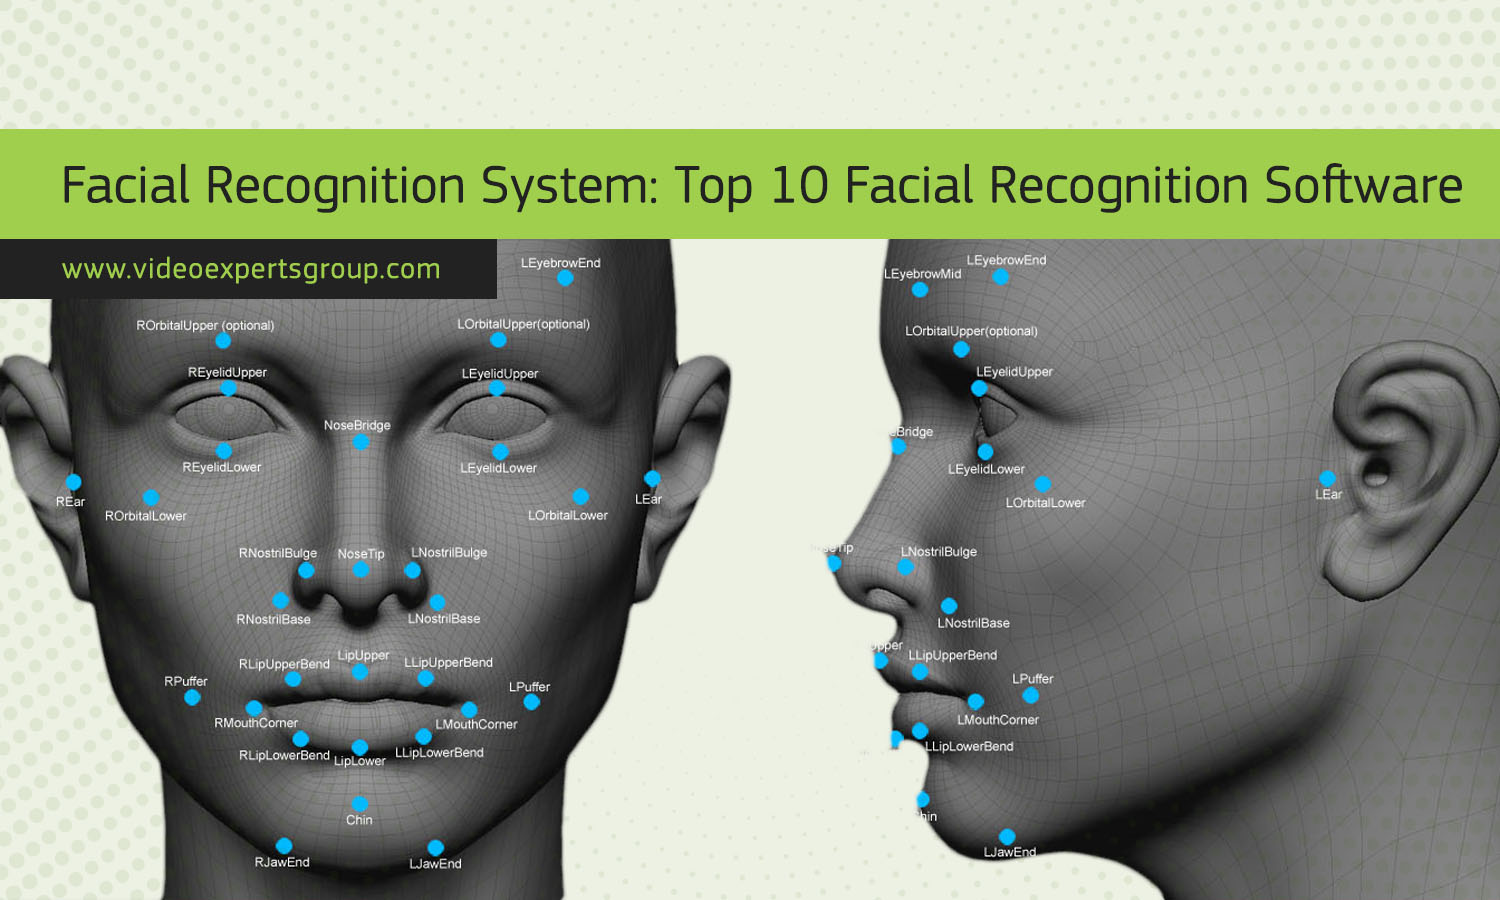 Facial Recognition System: Top 10 Facial Recognition Software